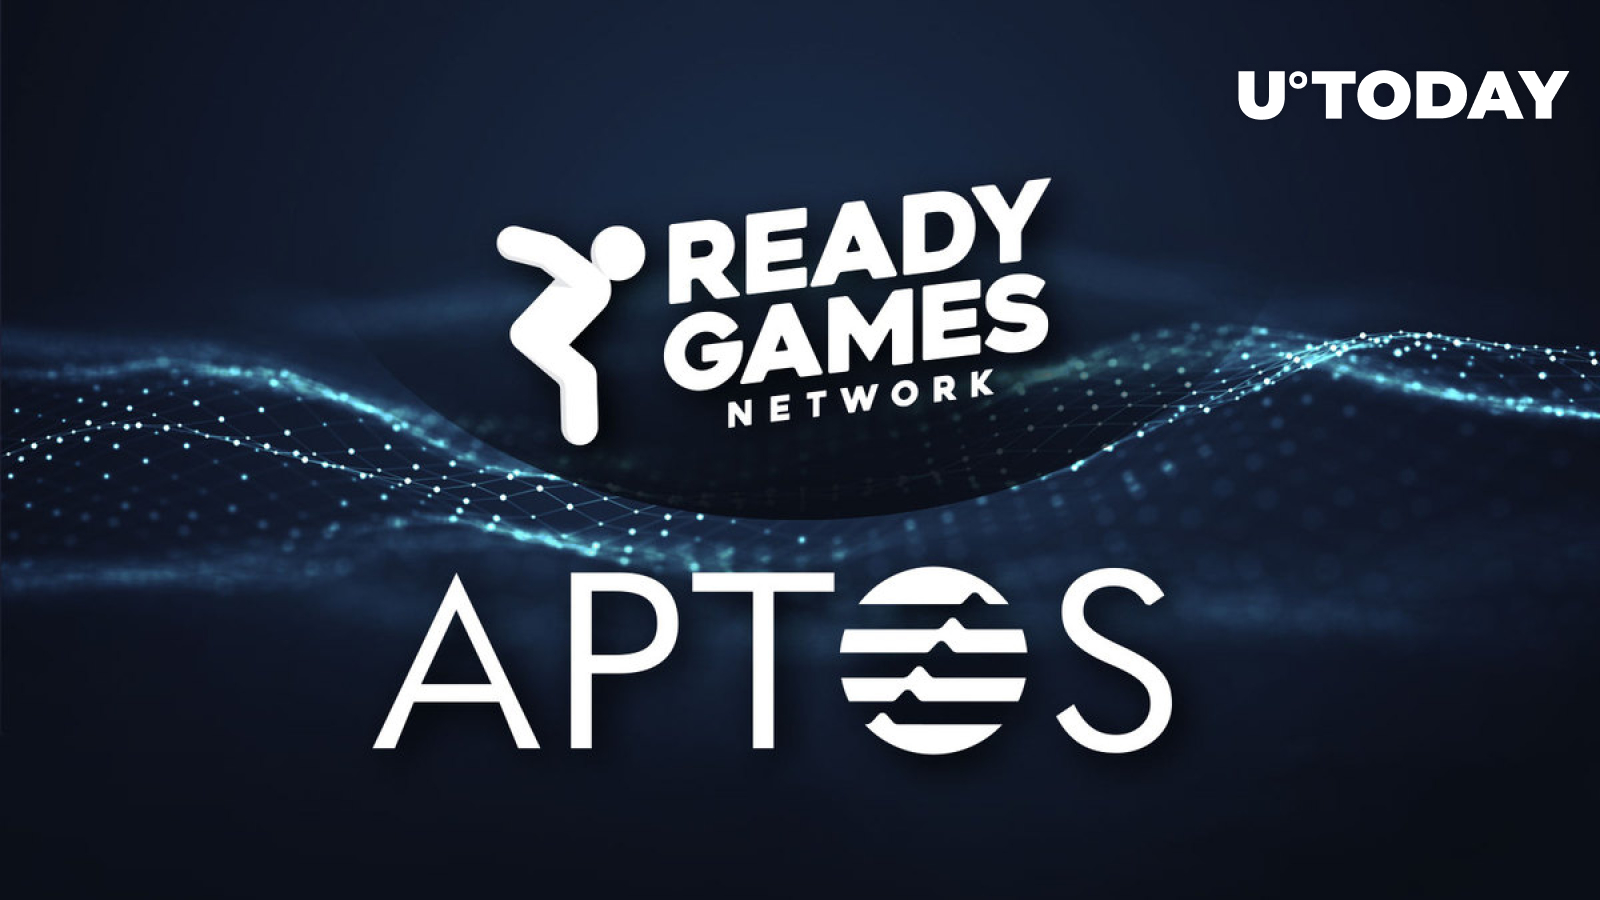 READYgg Teams up with Aptos, Welcomes Millions of New Players